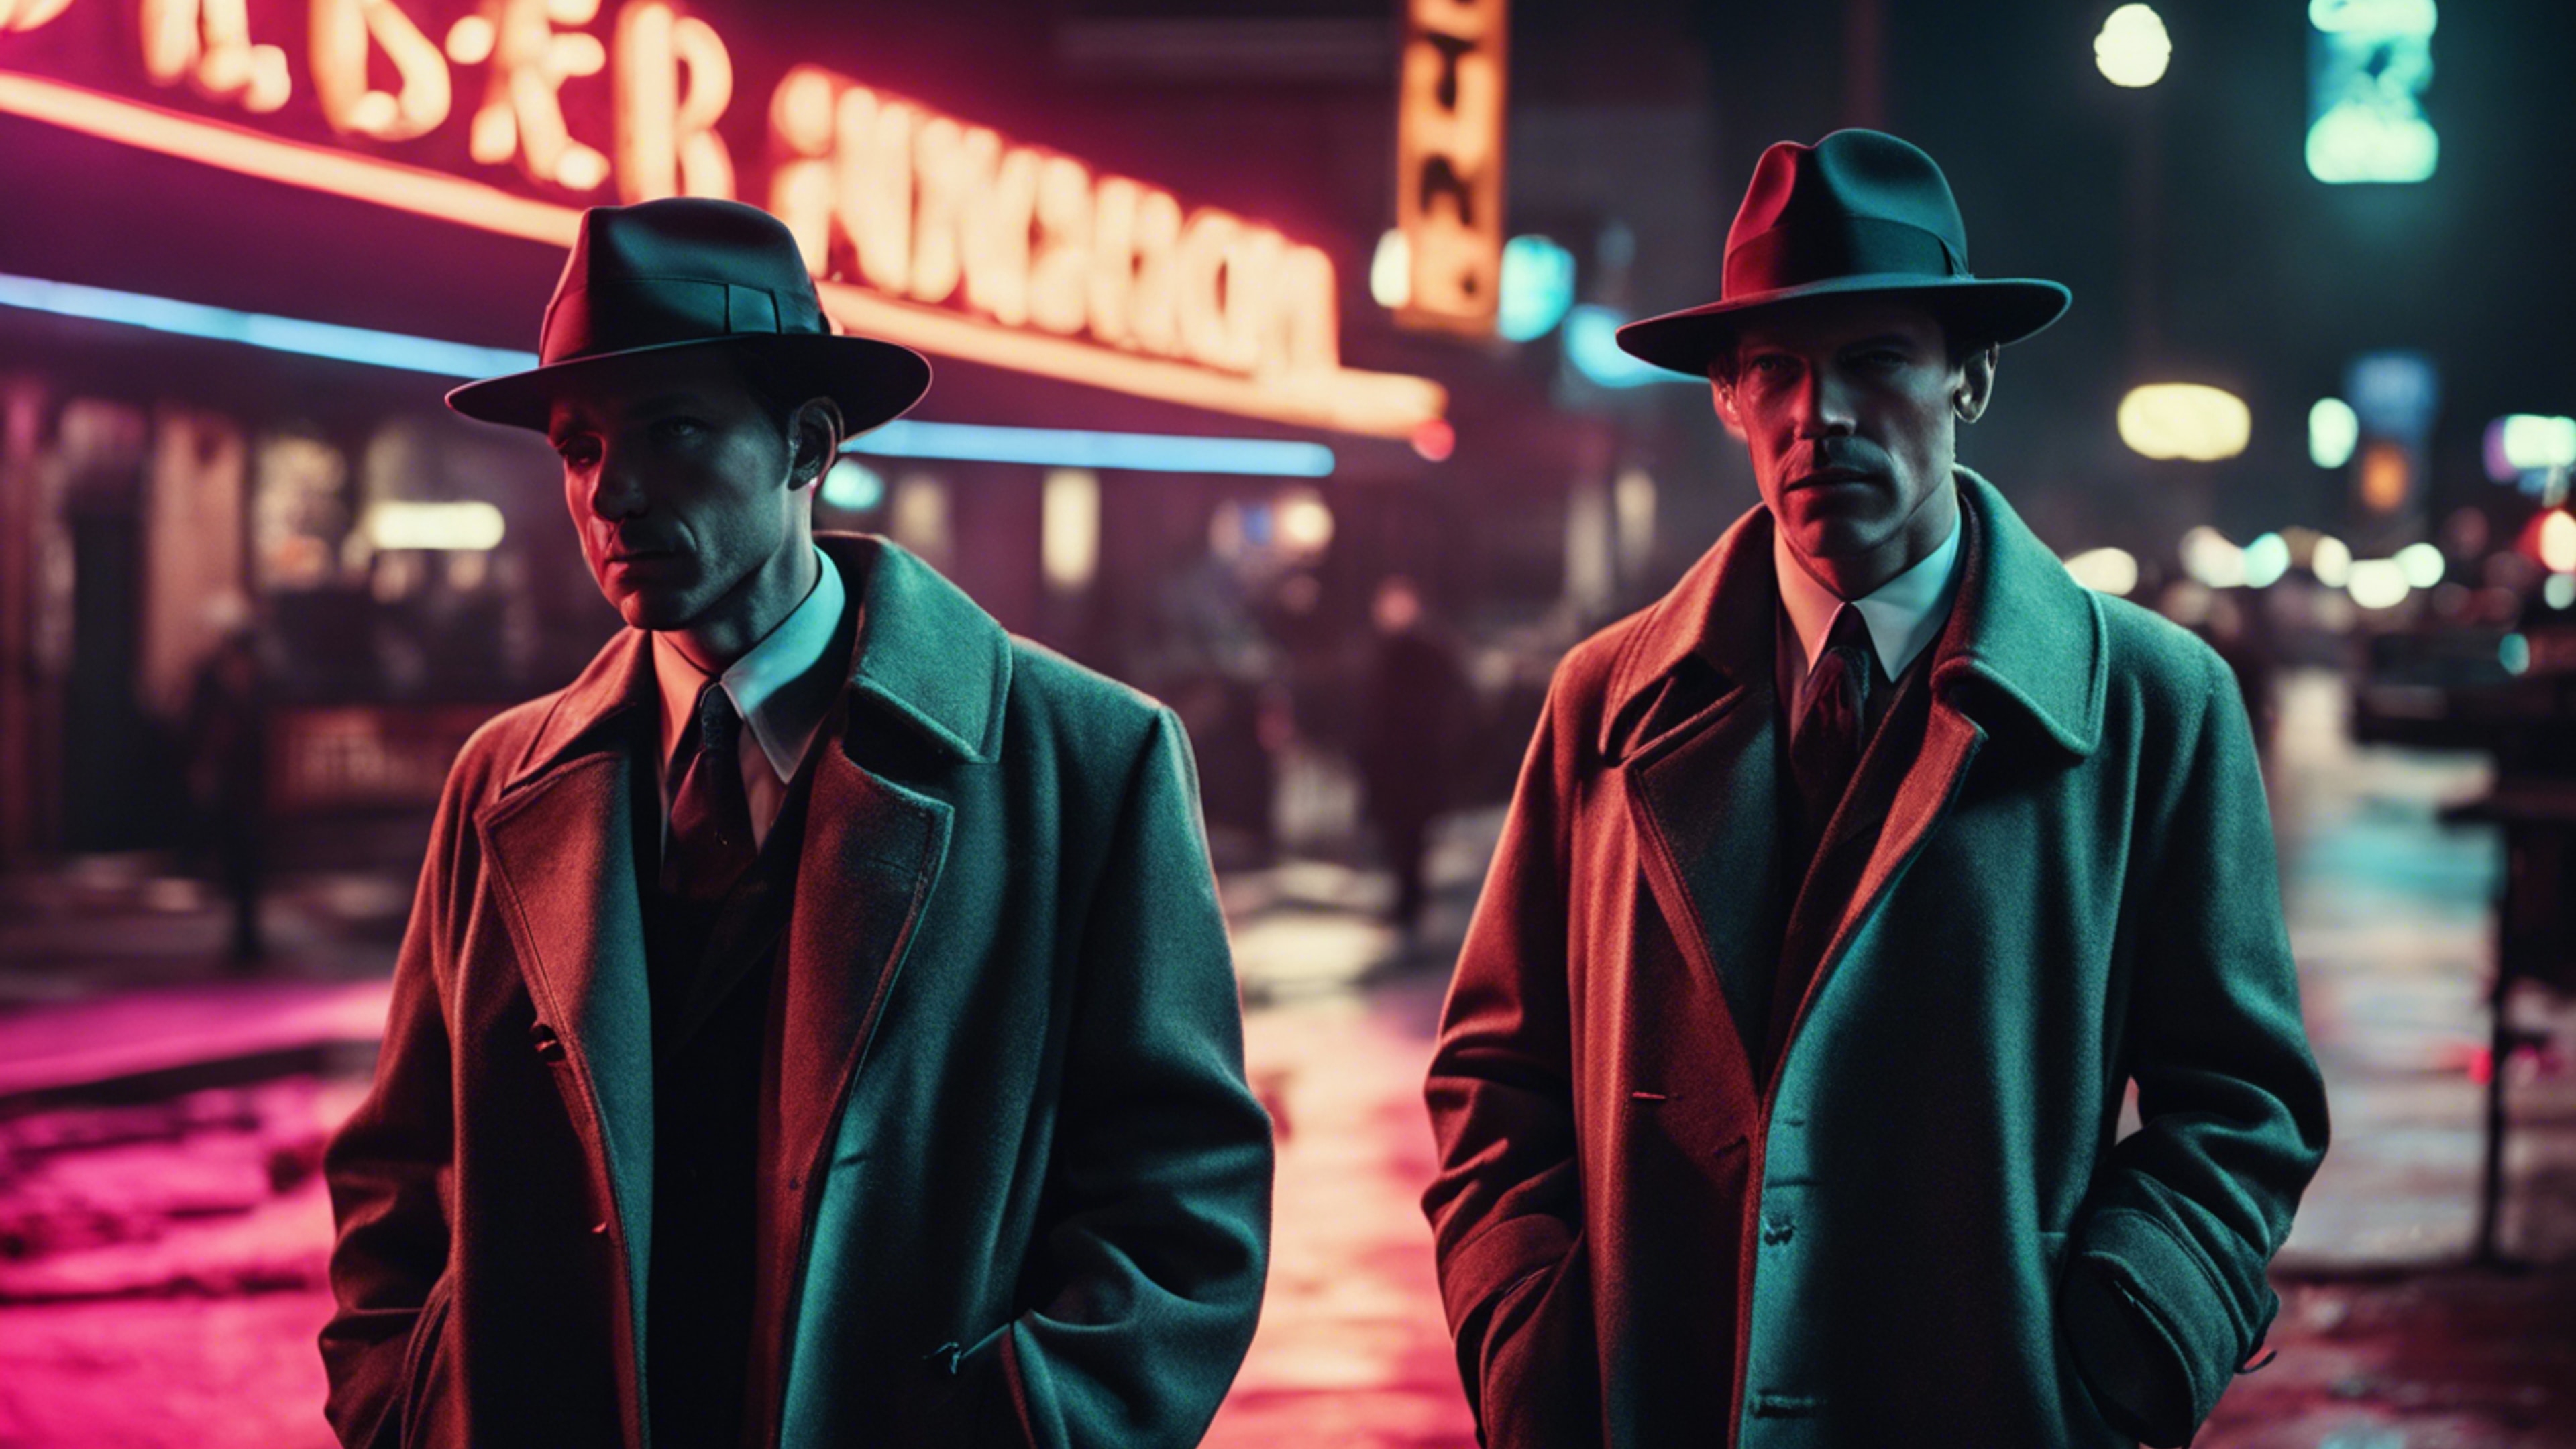 An old-timey noir detective scene, complete with fedoras and trench coats, but with a cool, modern neon black aesthetic. Wallpaper[1130d0c9b589467184c0]